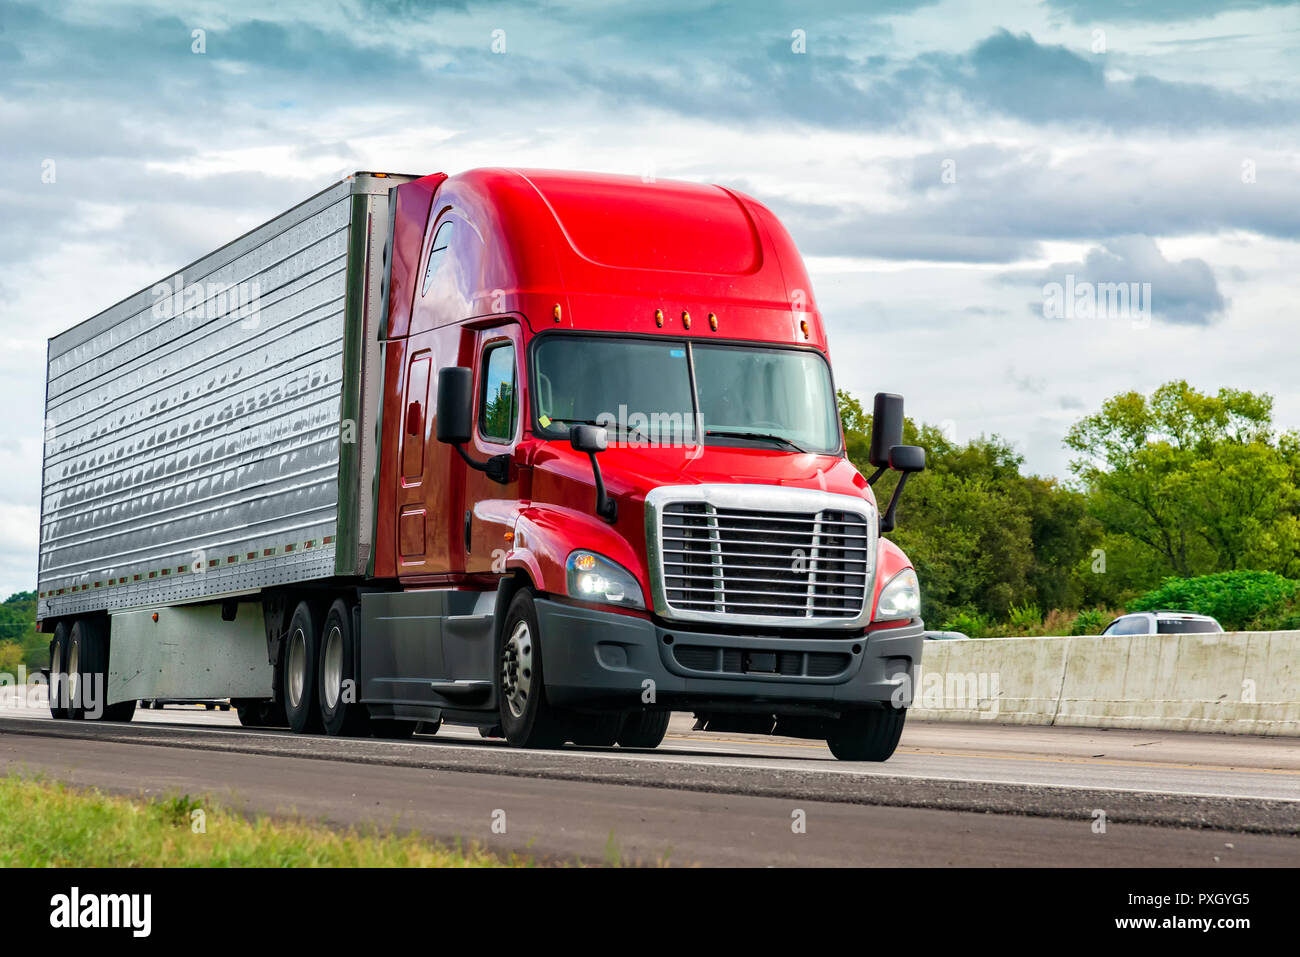 Horizontal shot of a red semi-truck on an interstate highway. Stock Photo